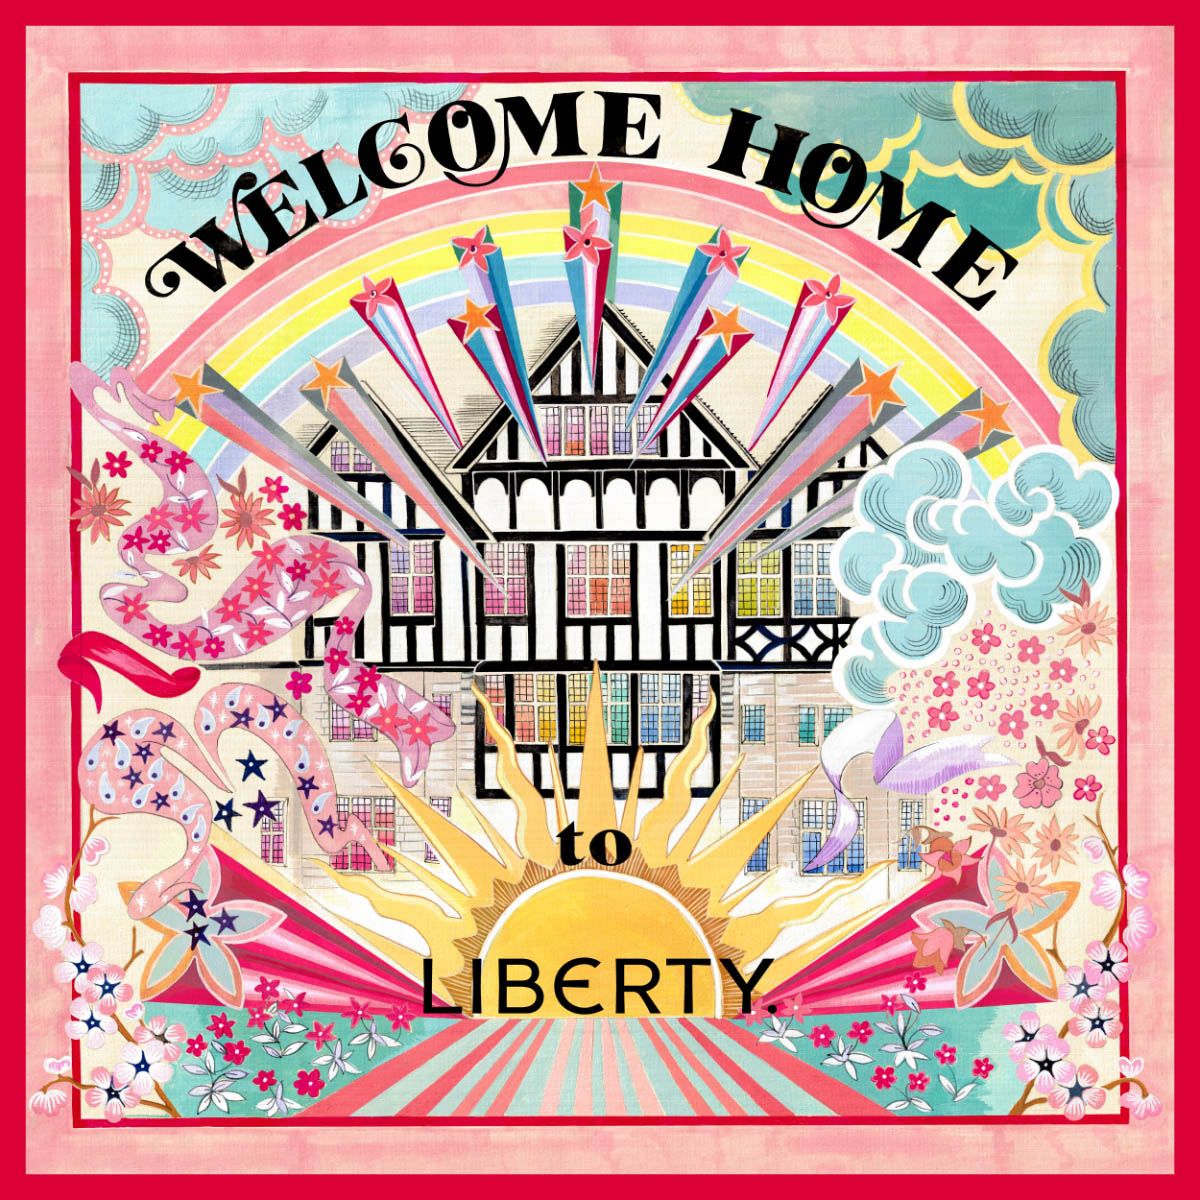 Welcome home to Liberty